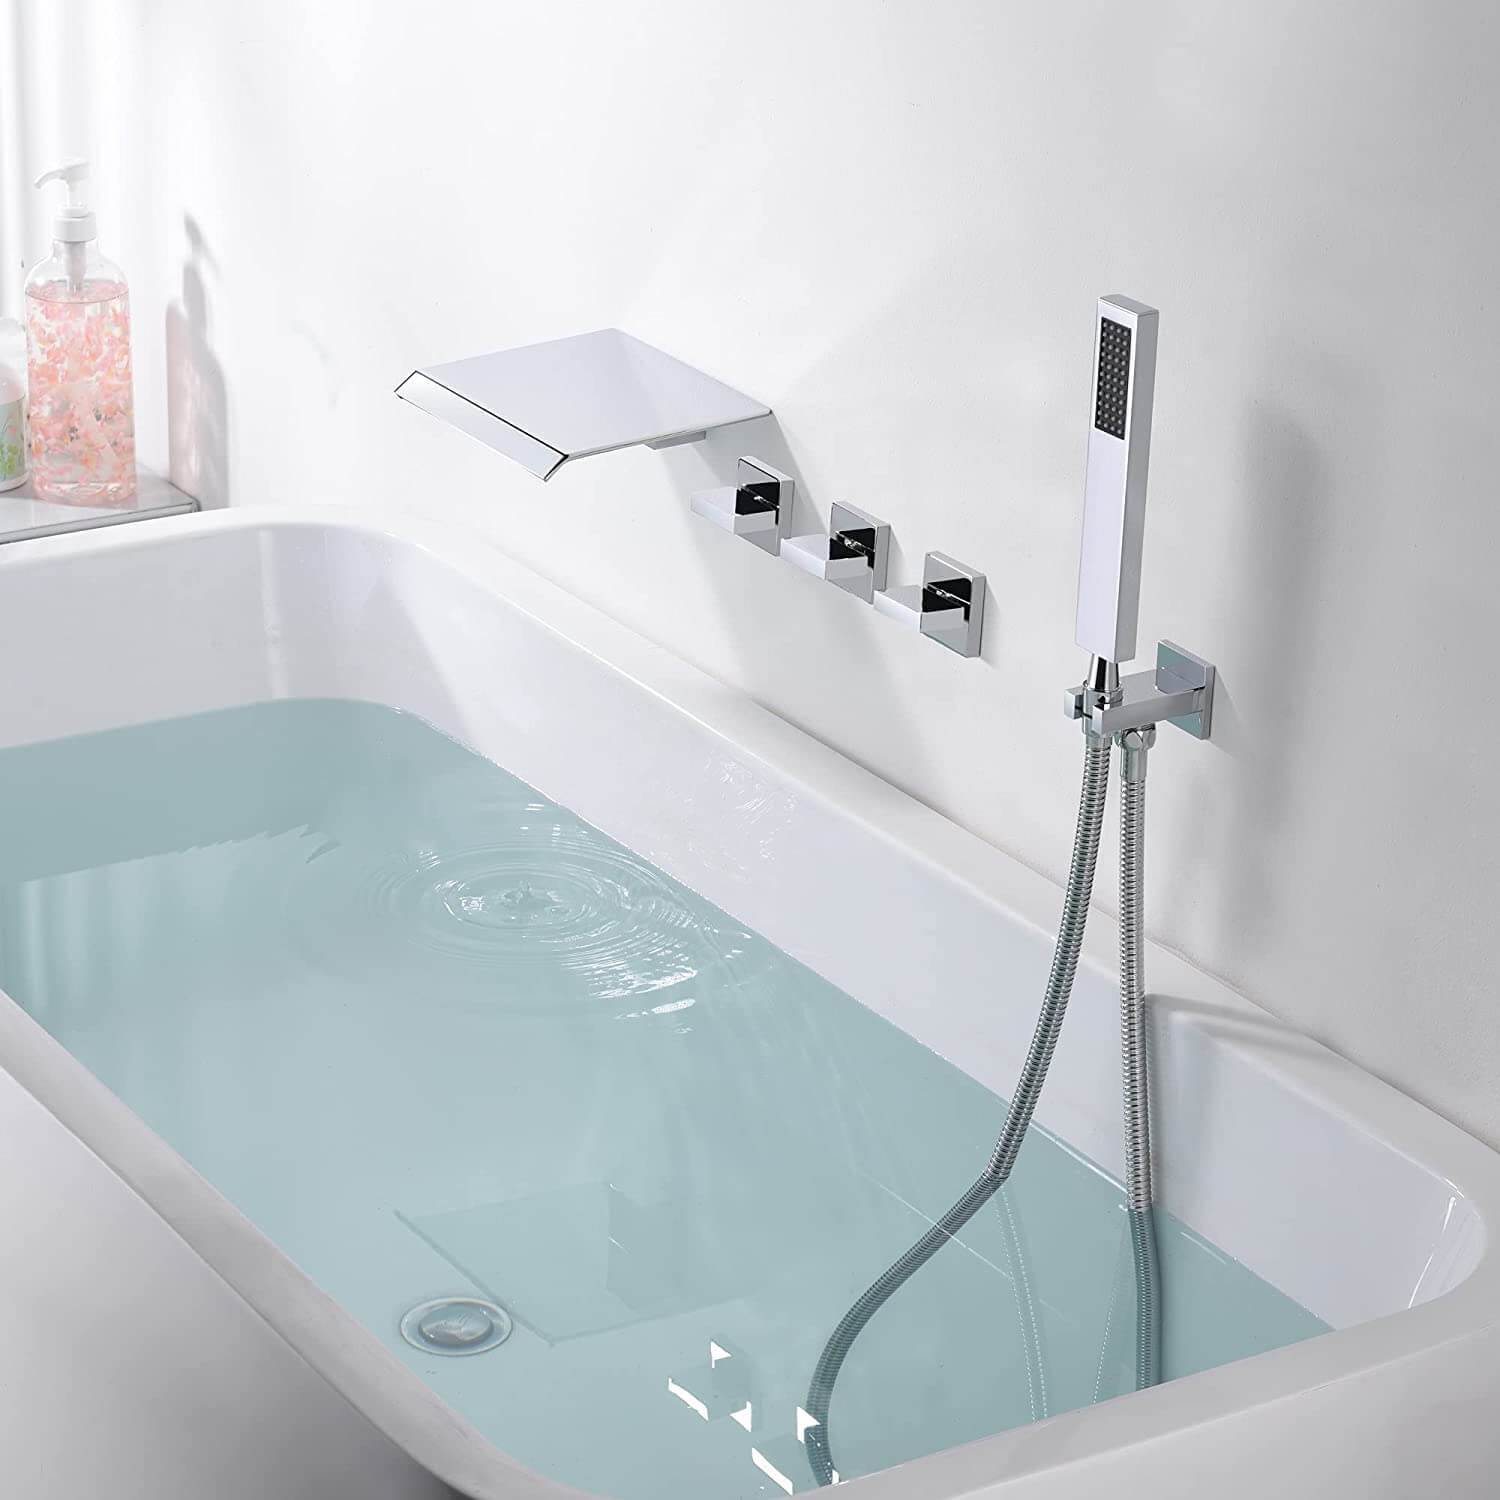 wowow 5 hole chrome wall mount waterfall tub filler